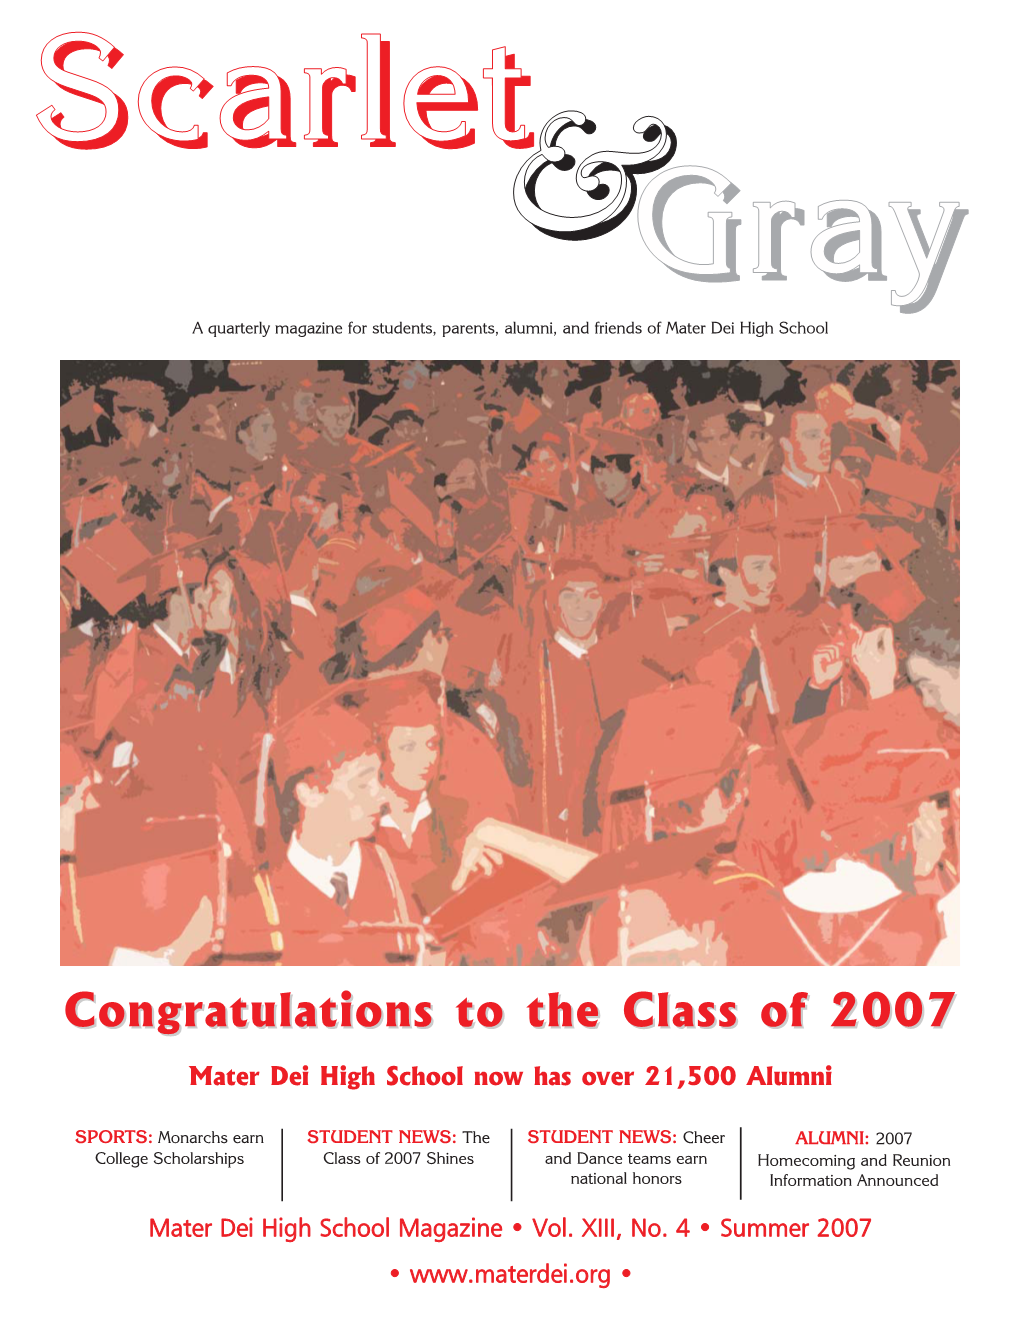 Congratulations to the Class of 2007 Each Year, Hundreds of Students Are Hon- Many Members of the Class of 2007 Went the Ored at the Annual Senior Awards Night